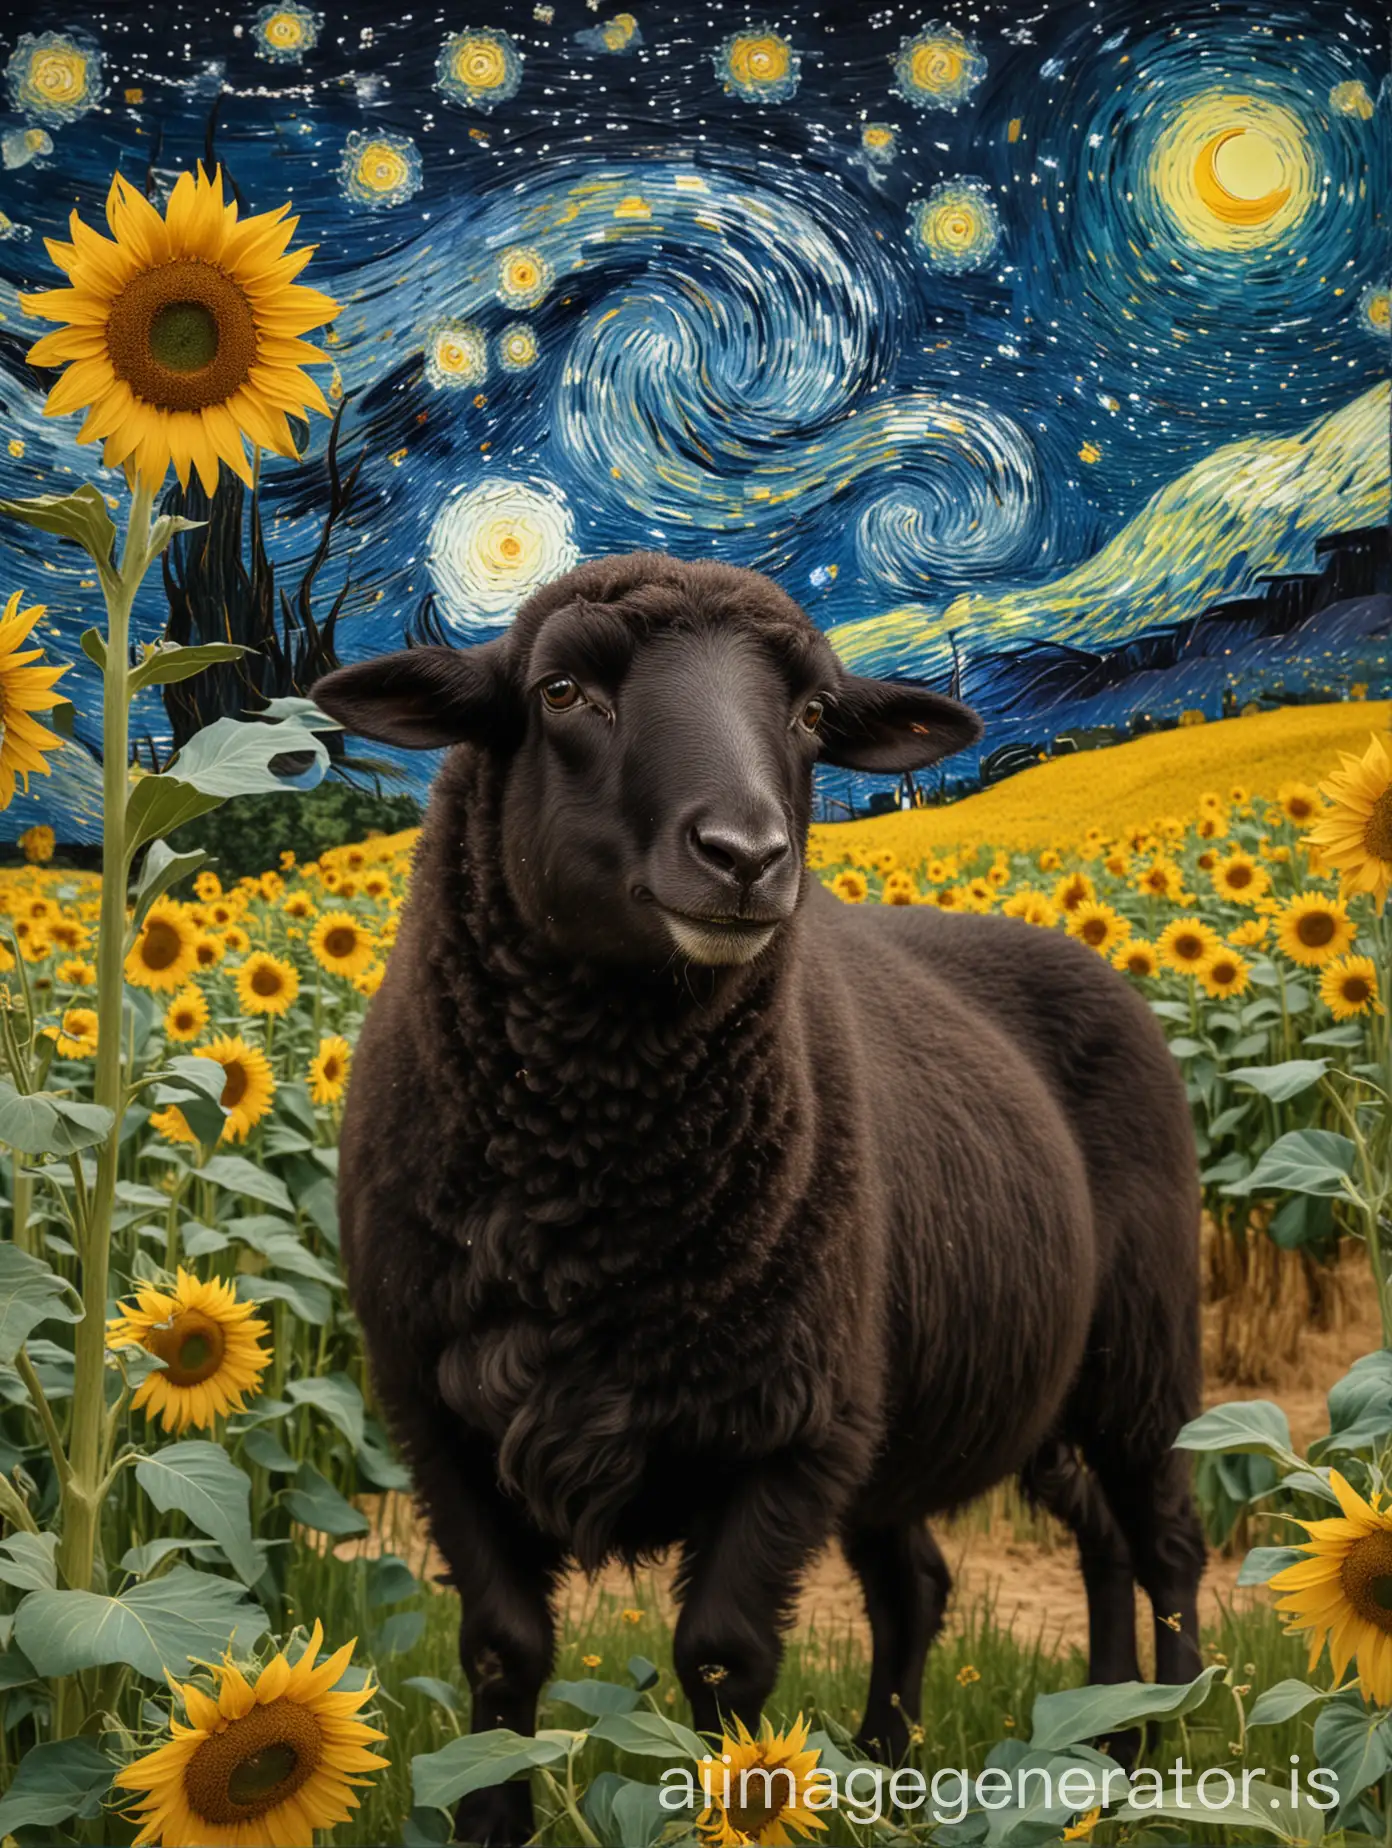 Van Gogh's Starry Night as the sky photo and a field with 5 black face sheep in the foreground along with sunflowers